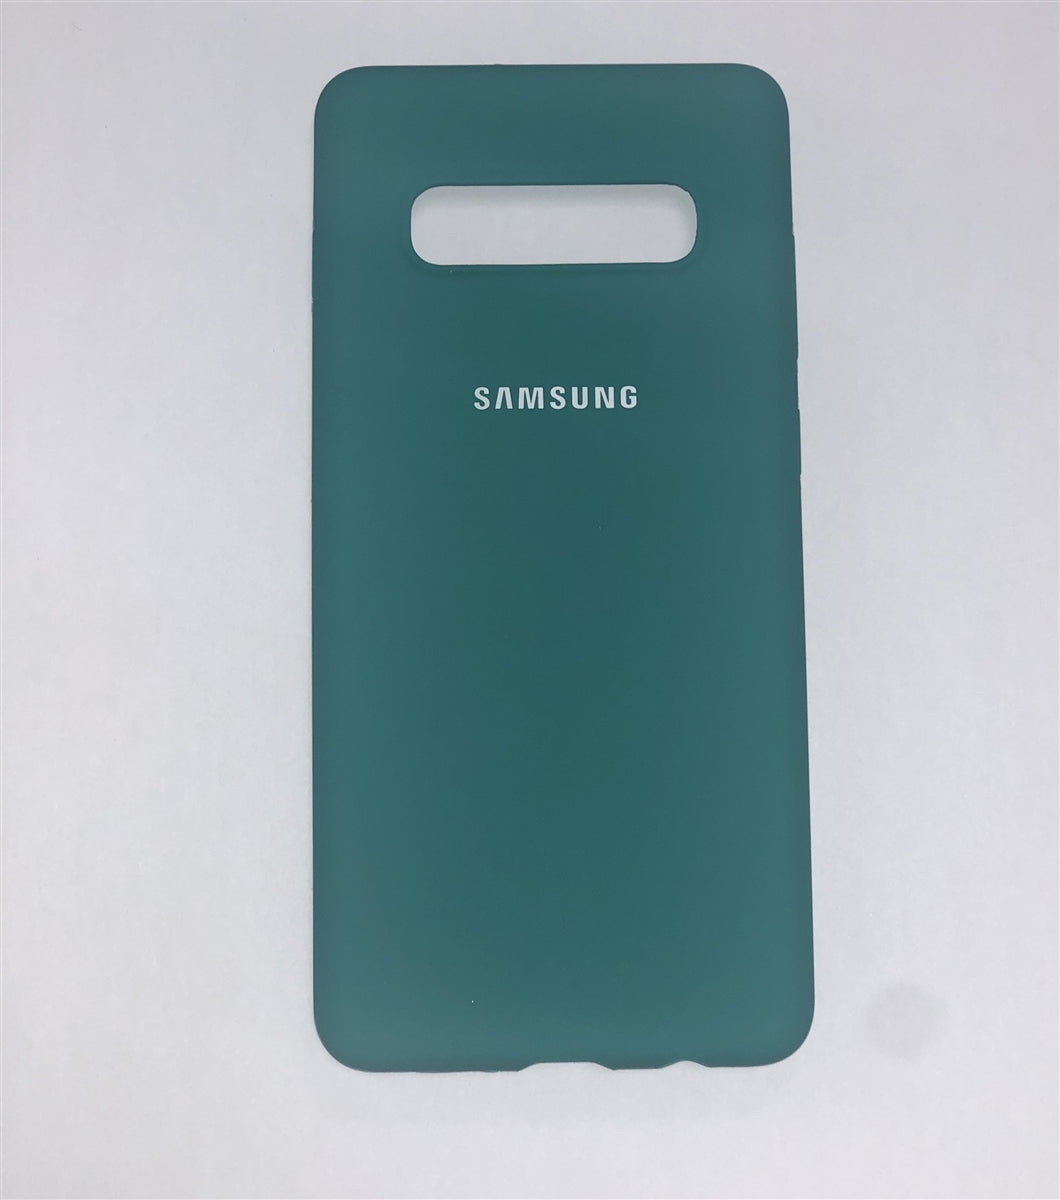 Samsung Silicone Case for Galaxy S10+ (Green)